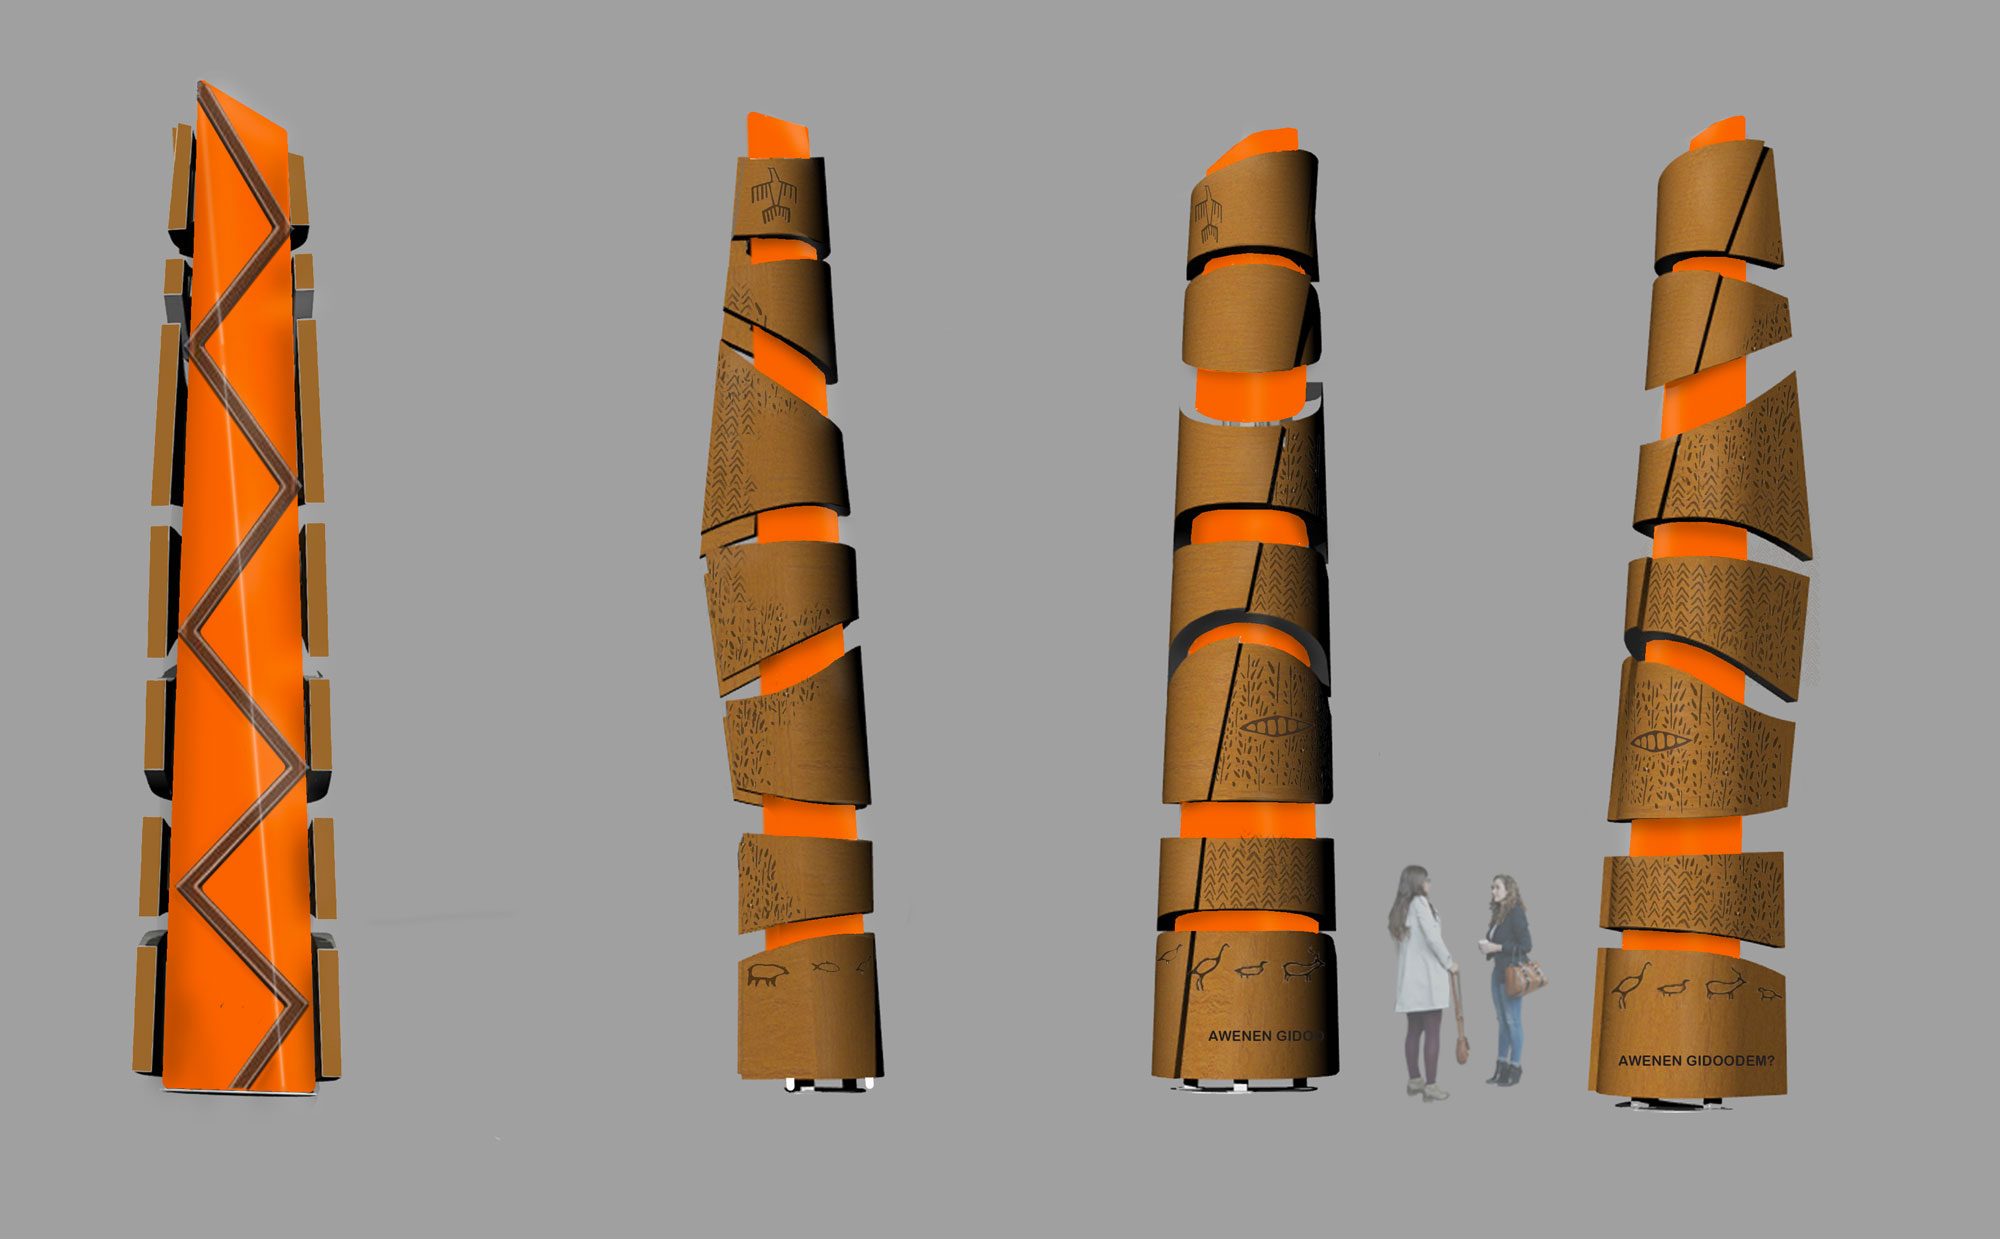 a group of tall orange poles sitting next to each other.